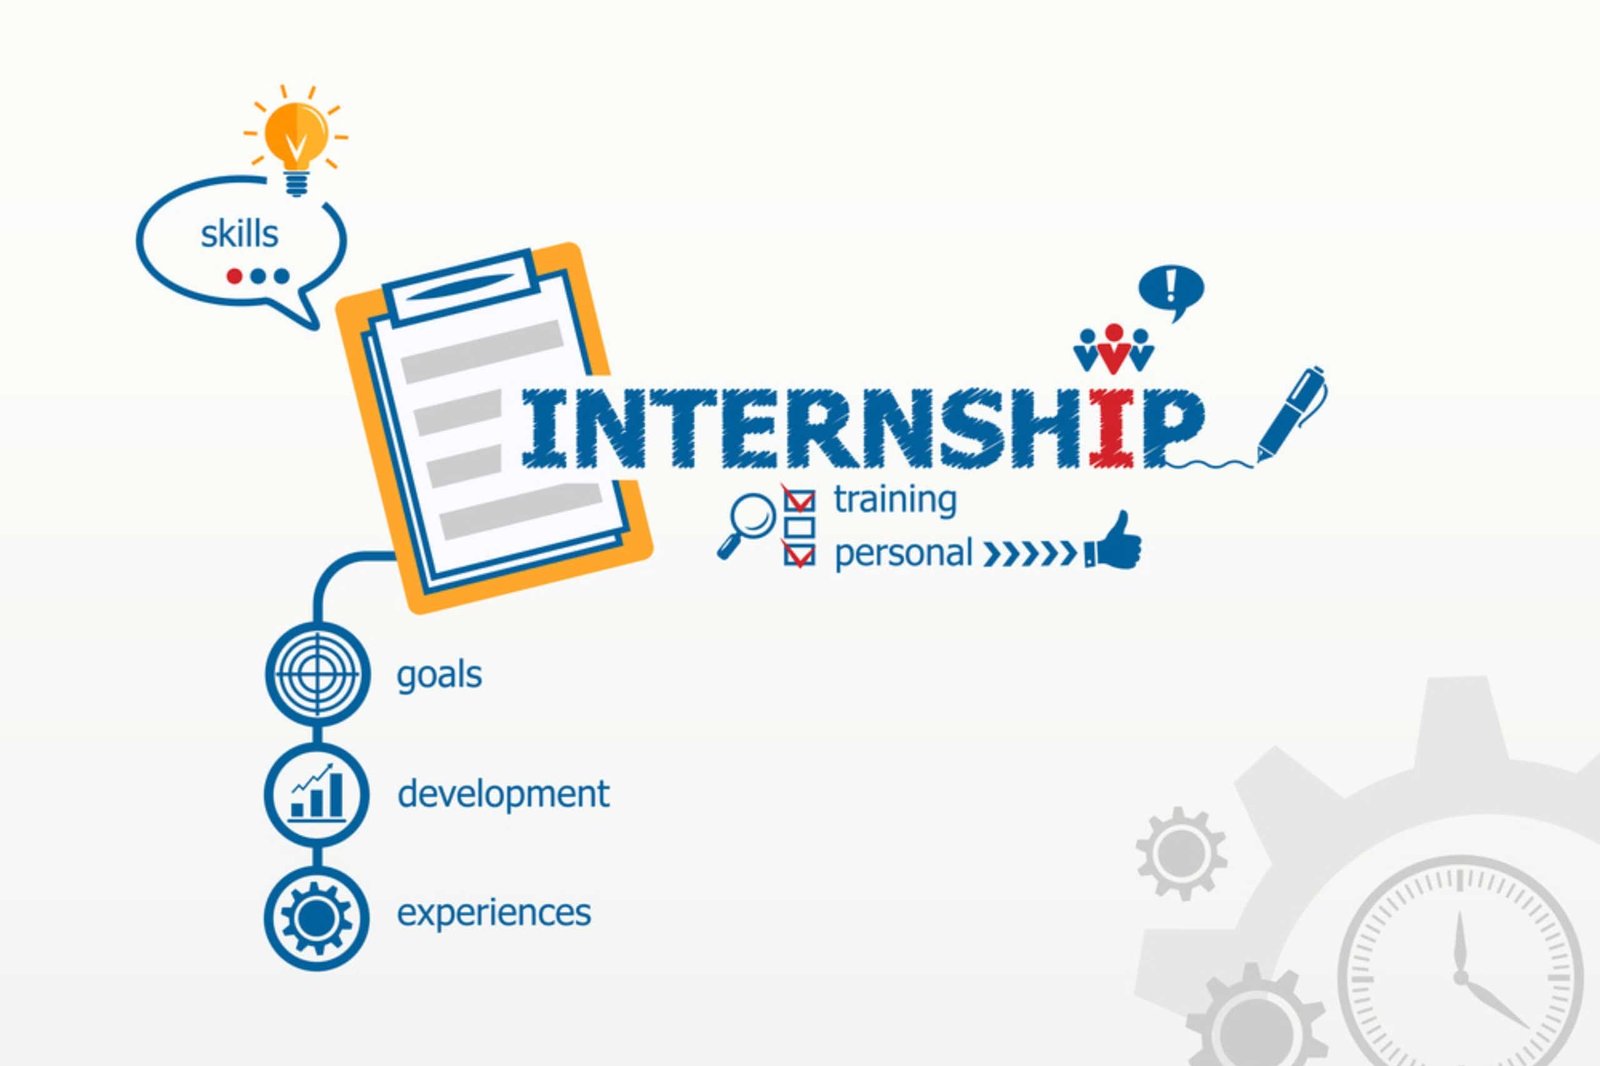 How to get a Internship into Data Analysts?